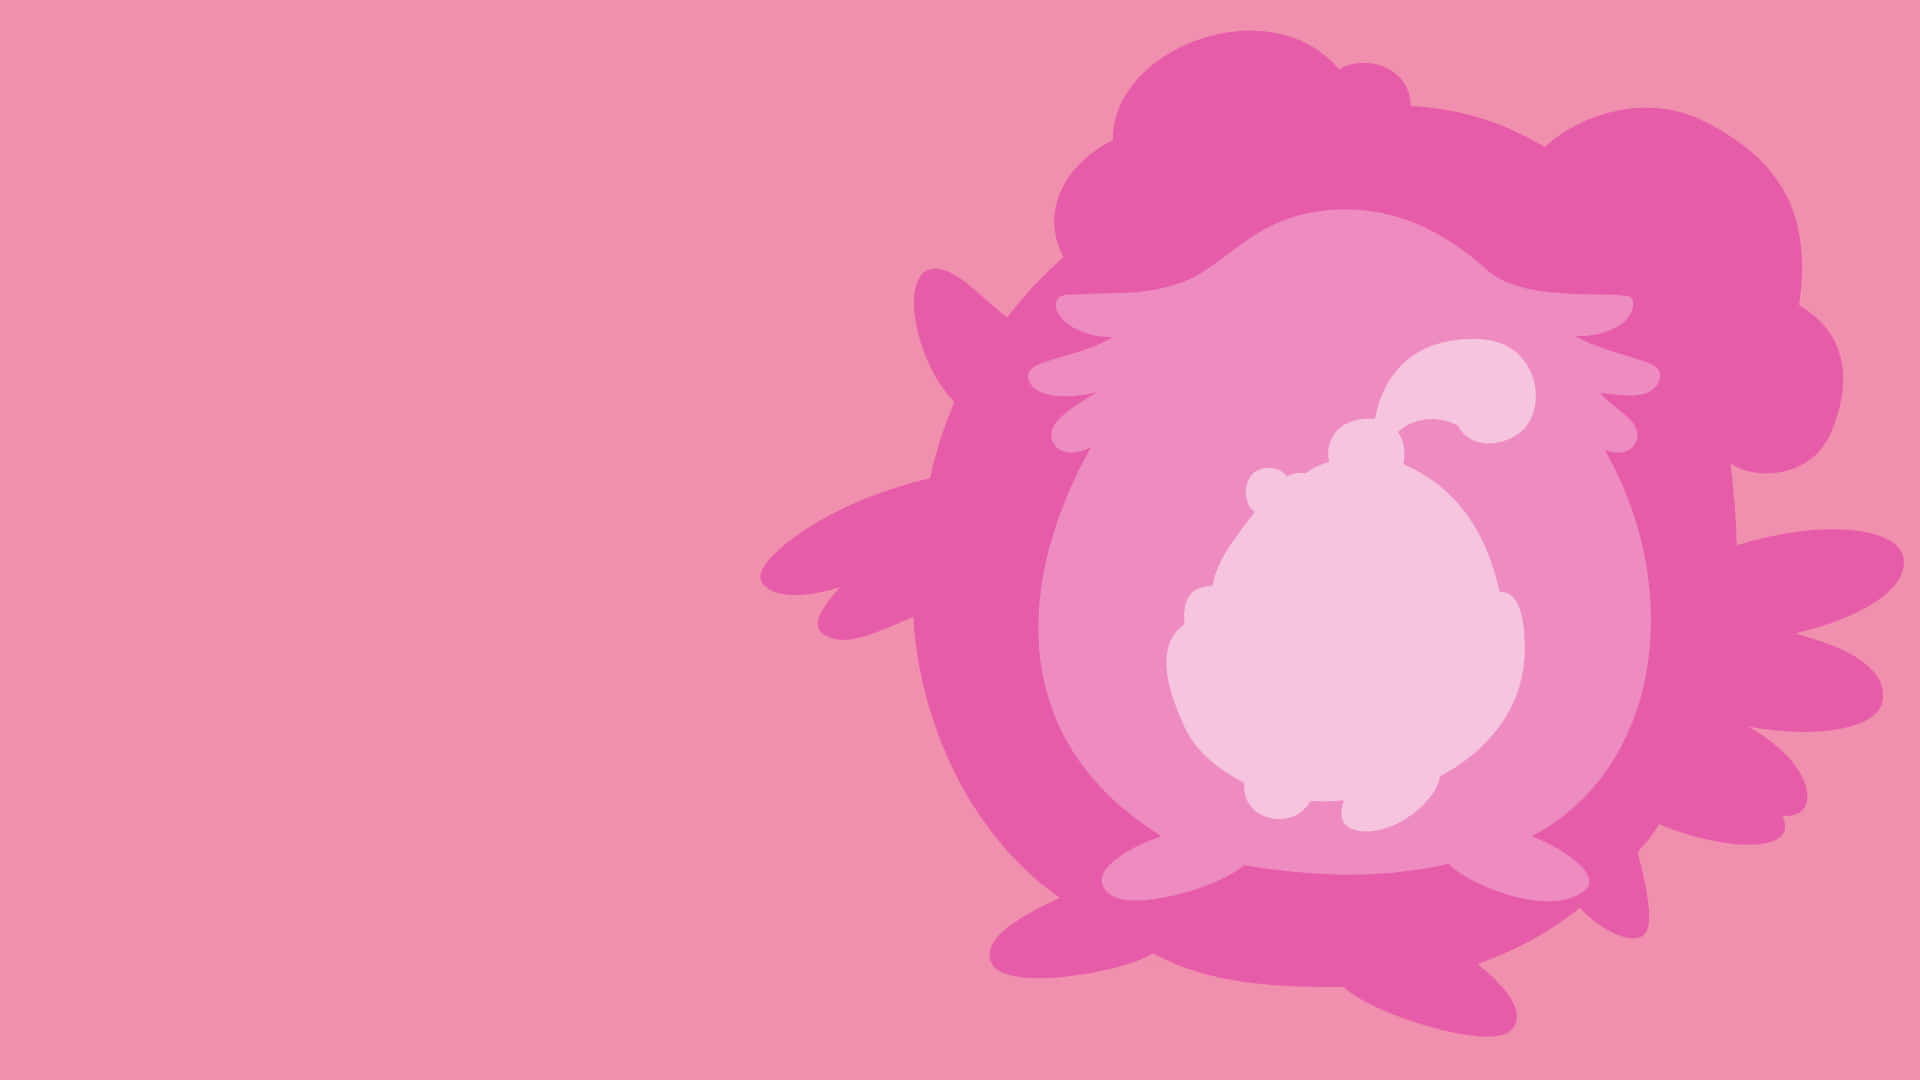 Concentric Blissey Evolution Silhouettes Wallpaper